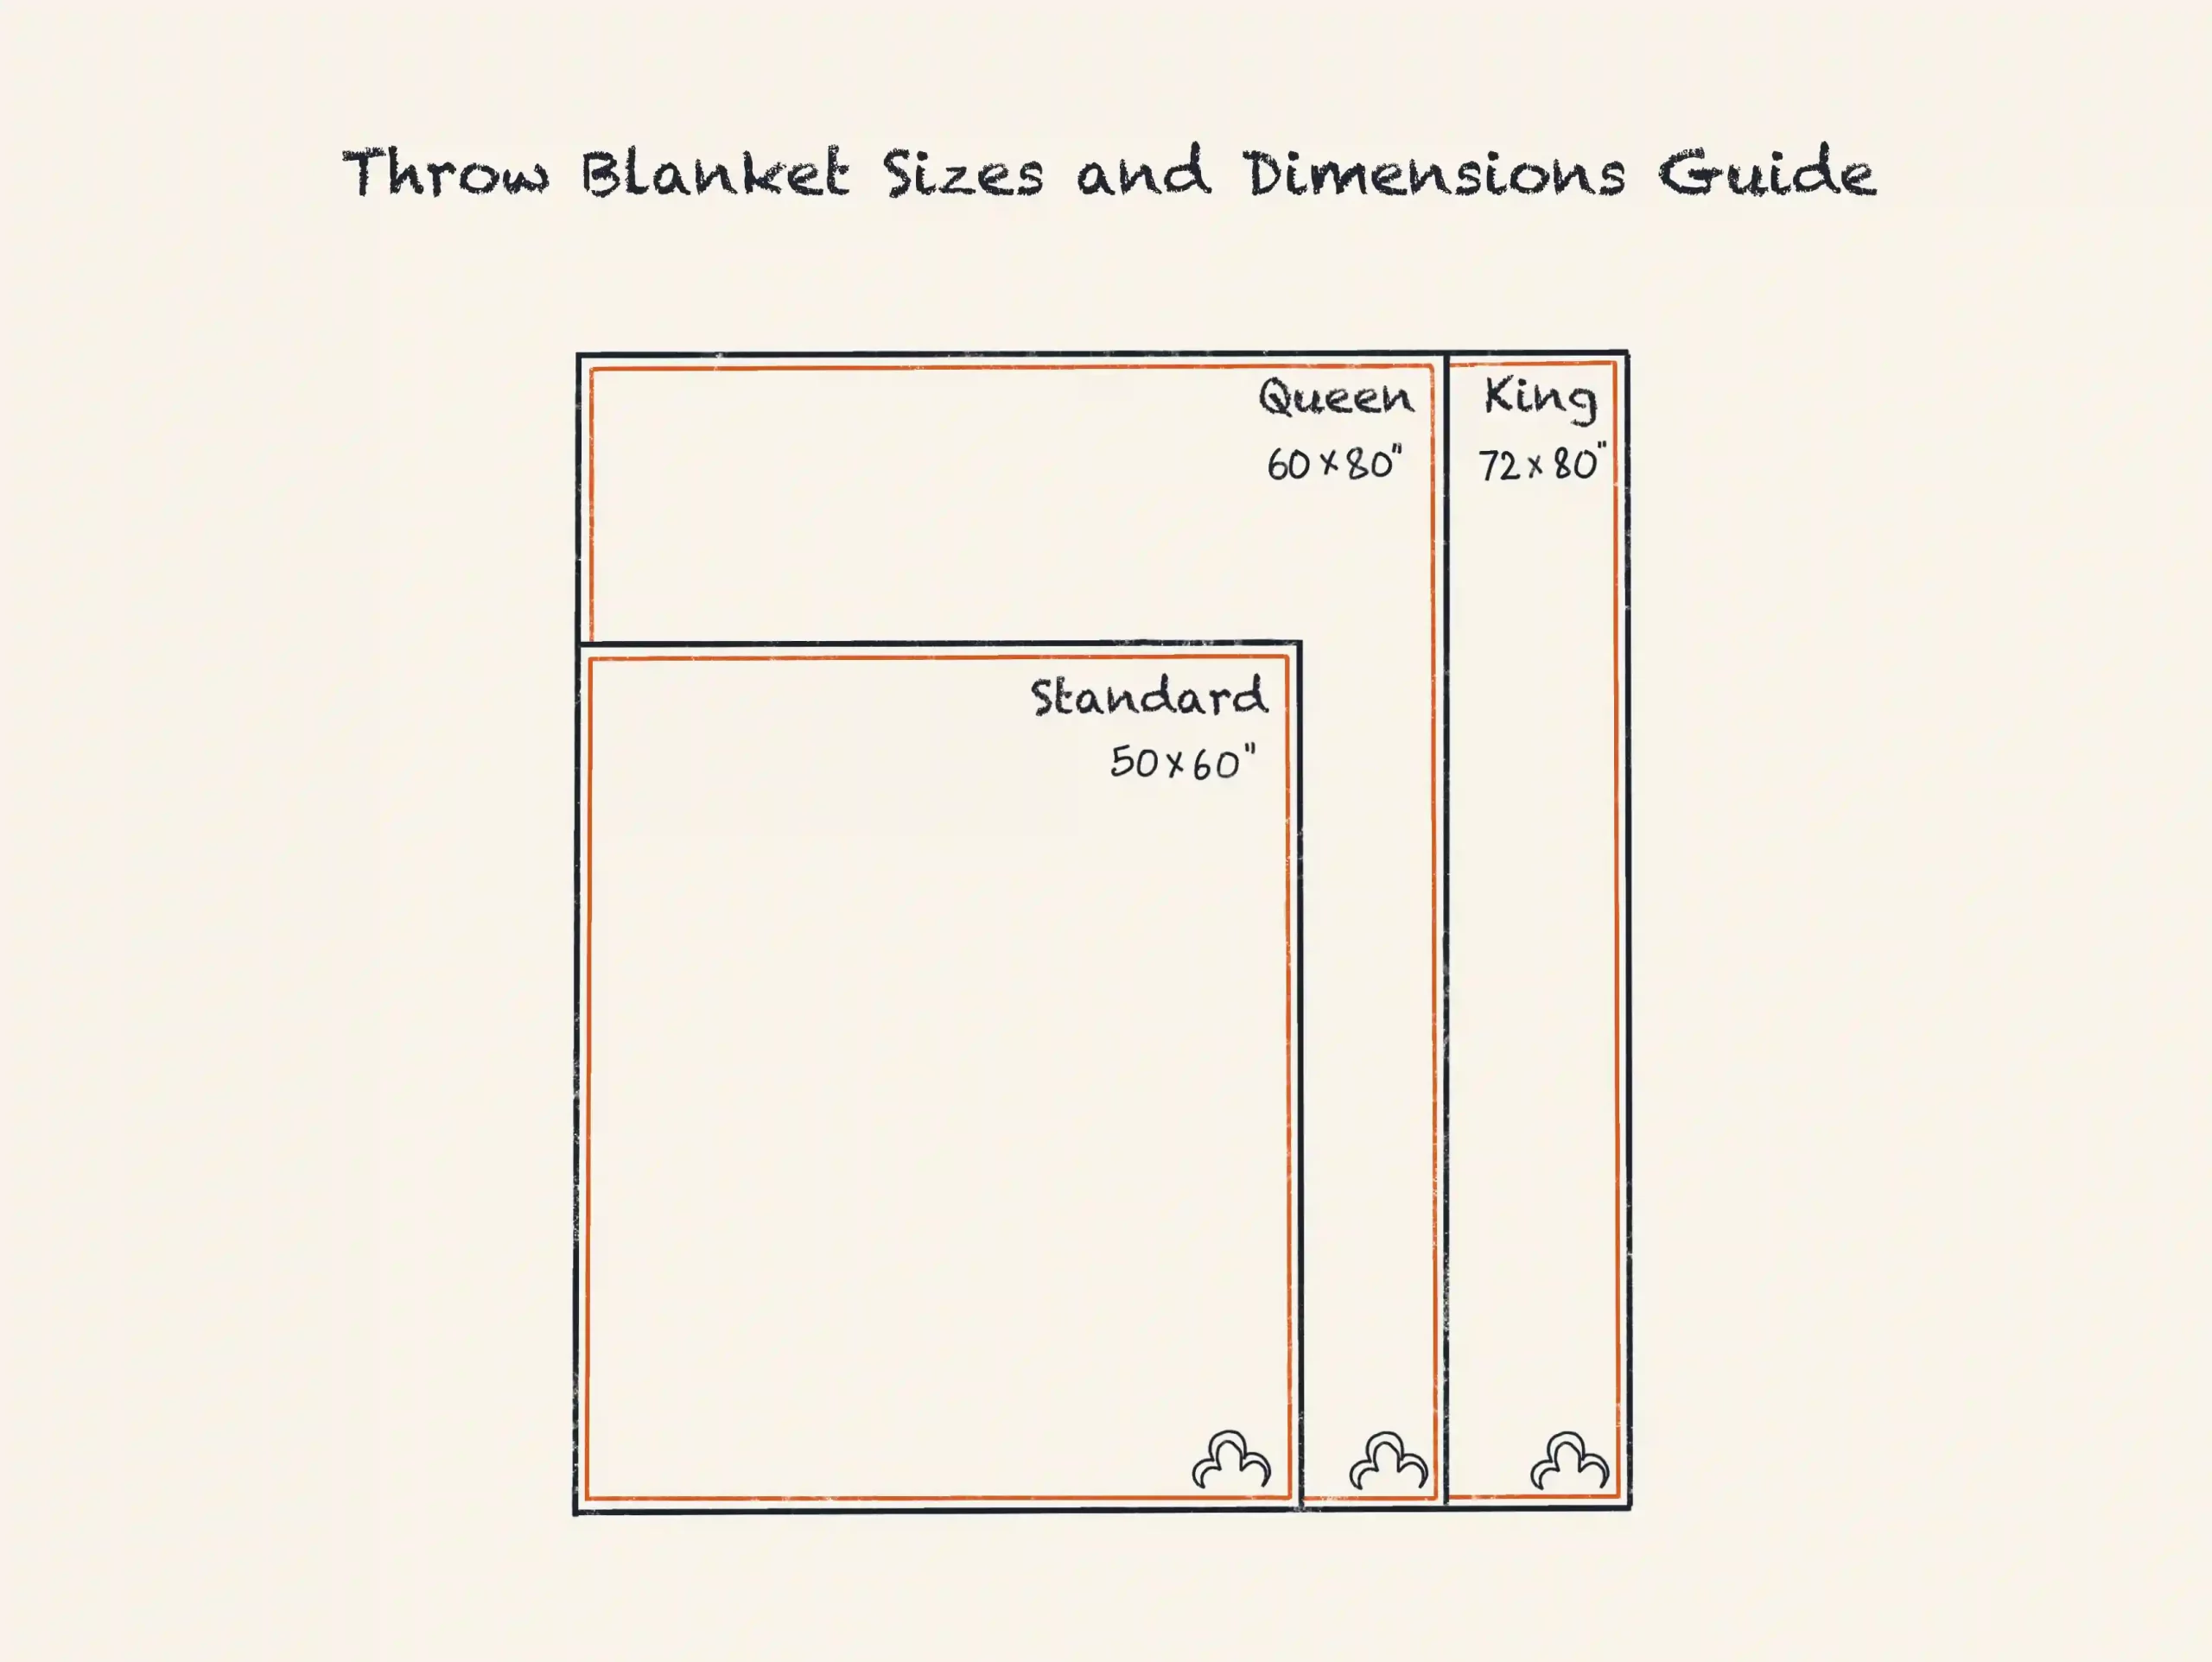 Xxx Illustration Of Throw Blanket Sizes And Dimensions Guide Scaled.webp